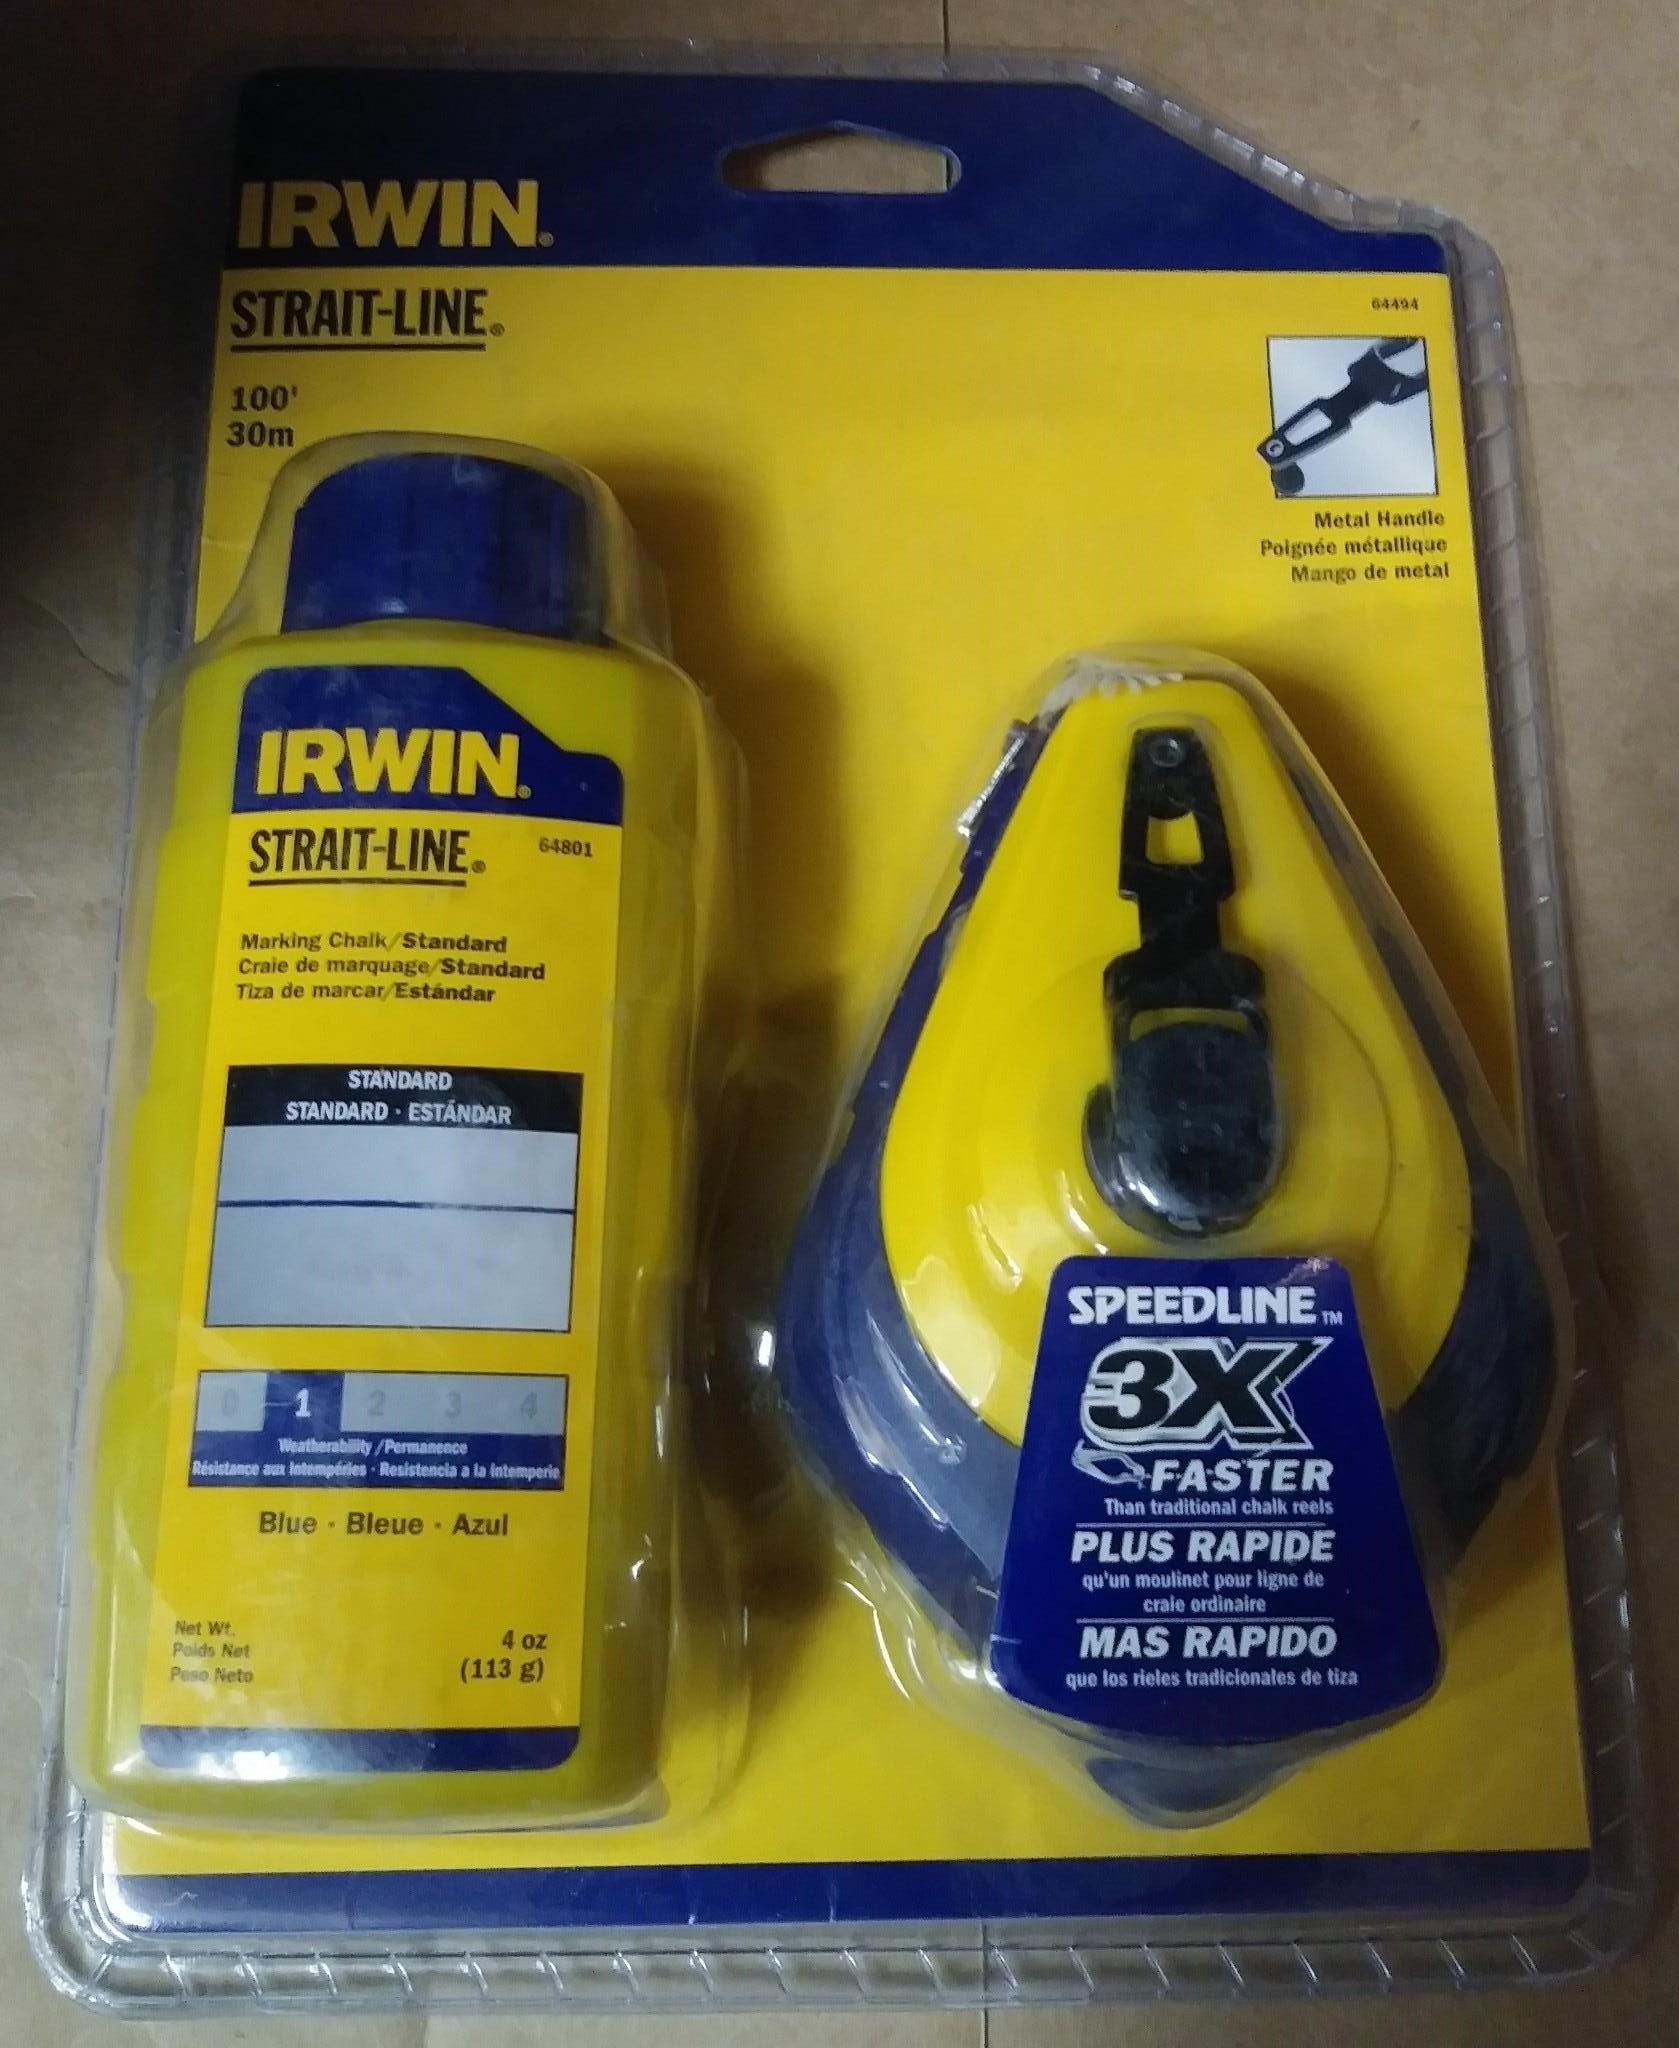 IRWIN STRAIT-LINE Classic 3:1 30-ft Chalk Reel in the Chalk Reels  department at